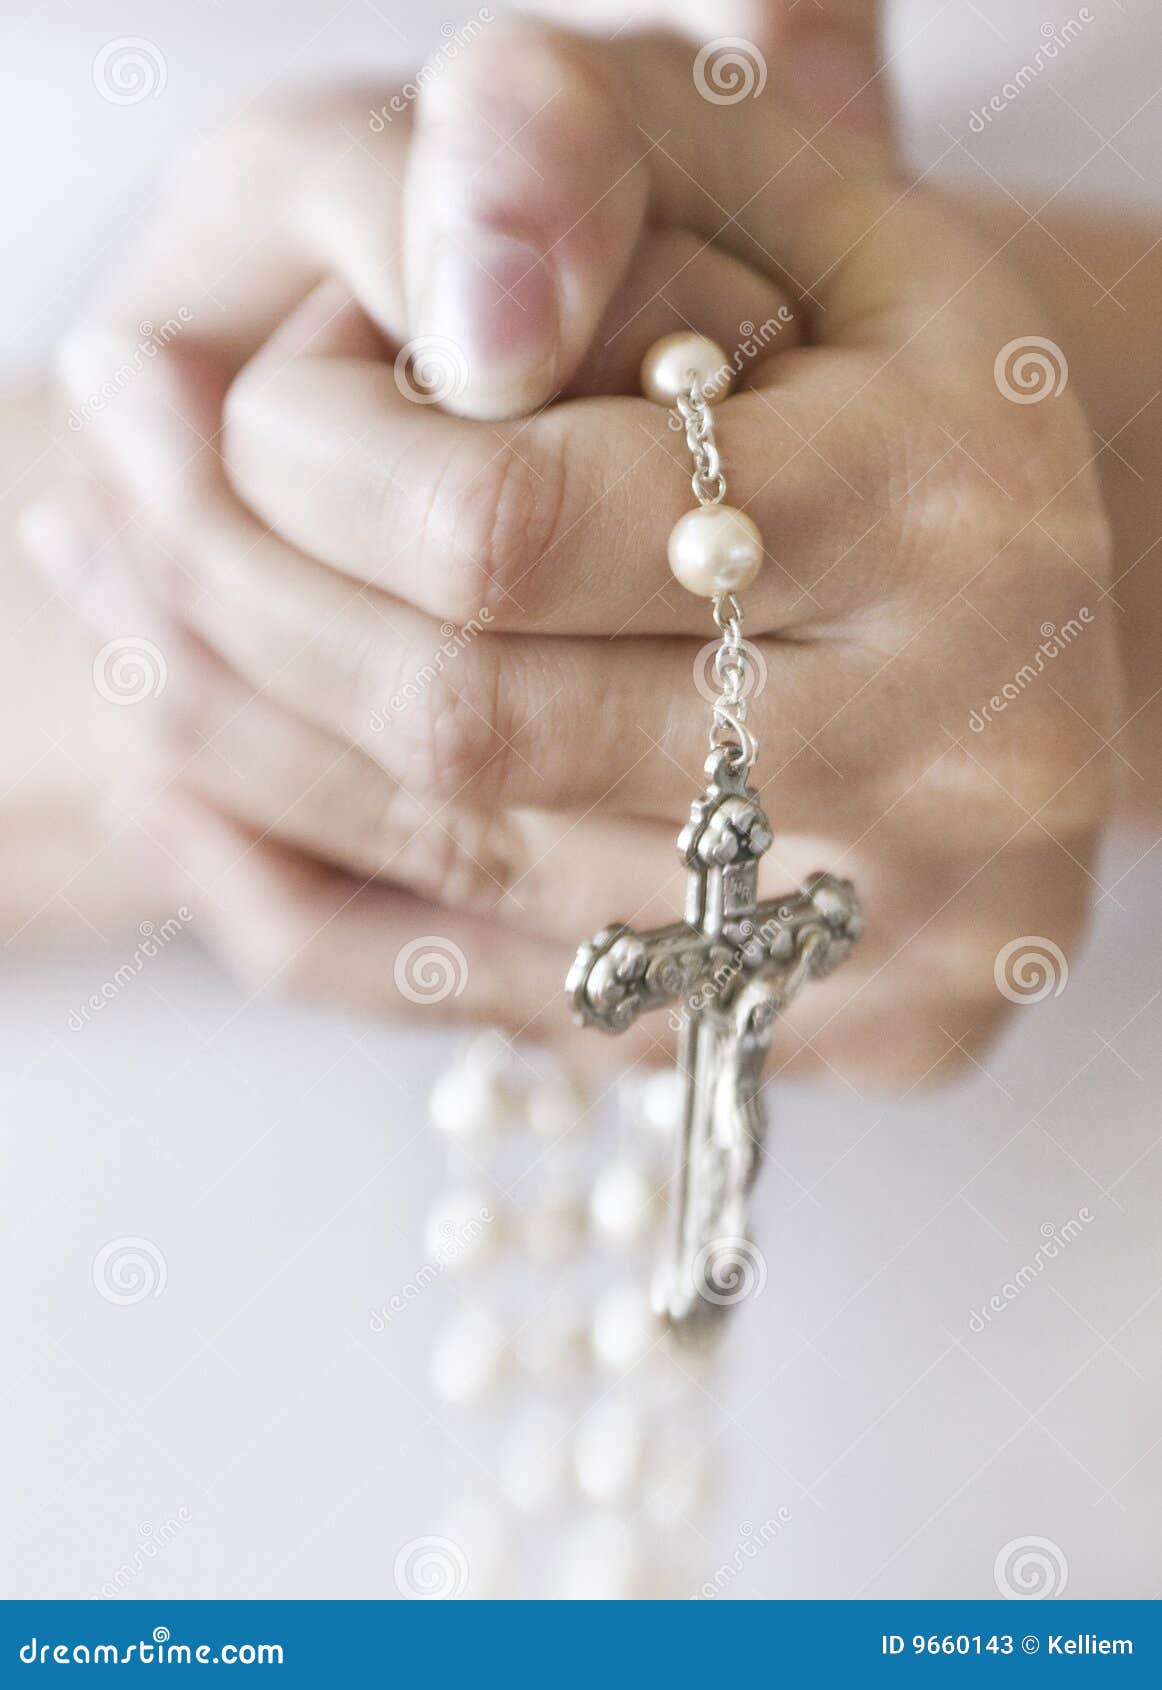 person holding rosary beads